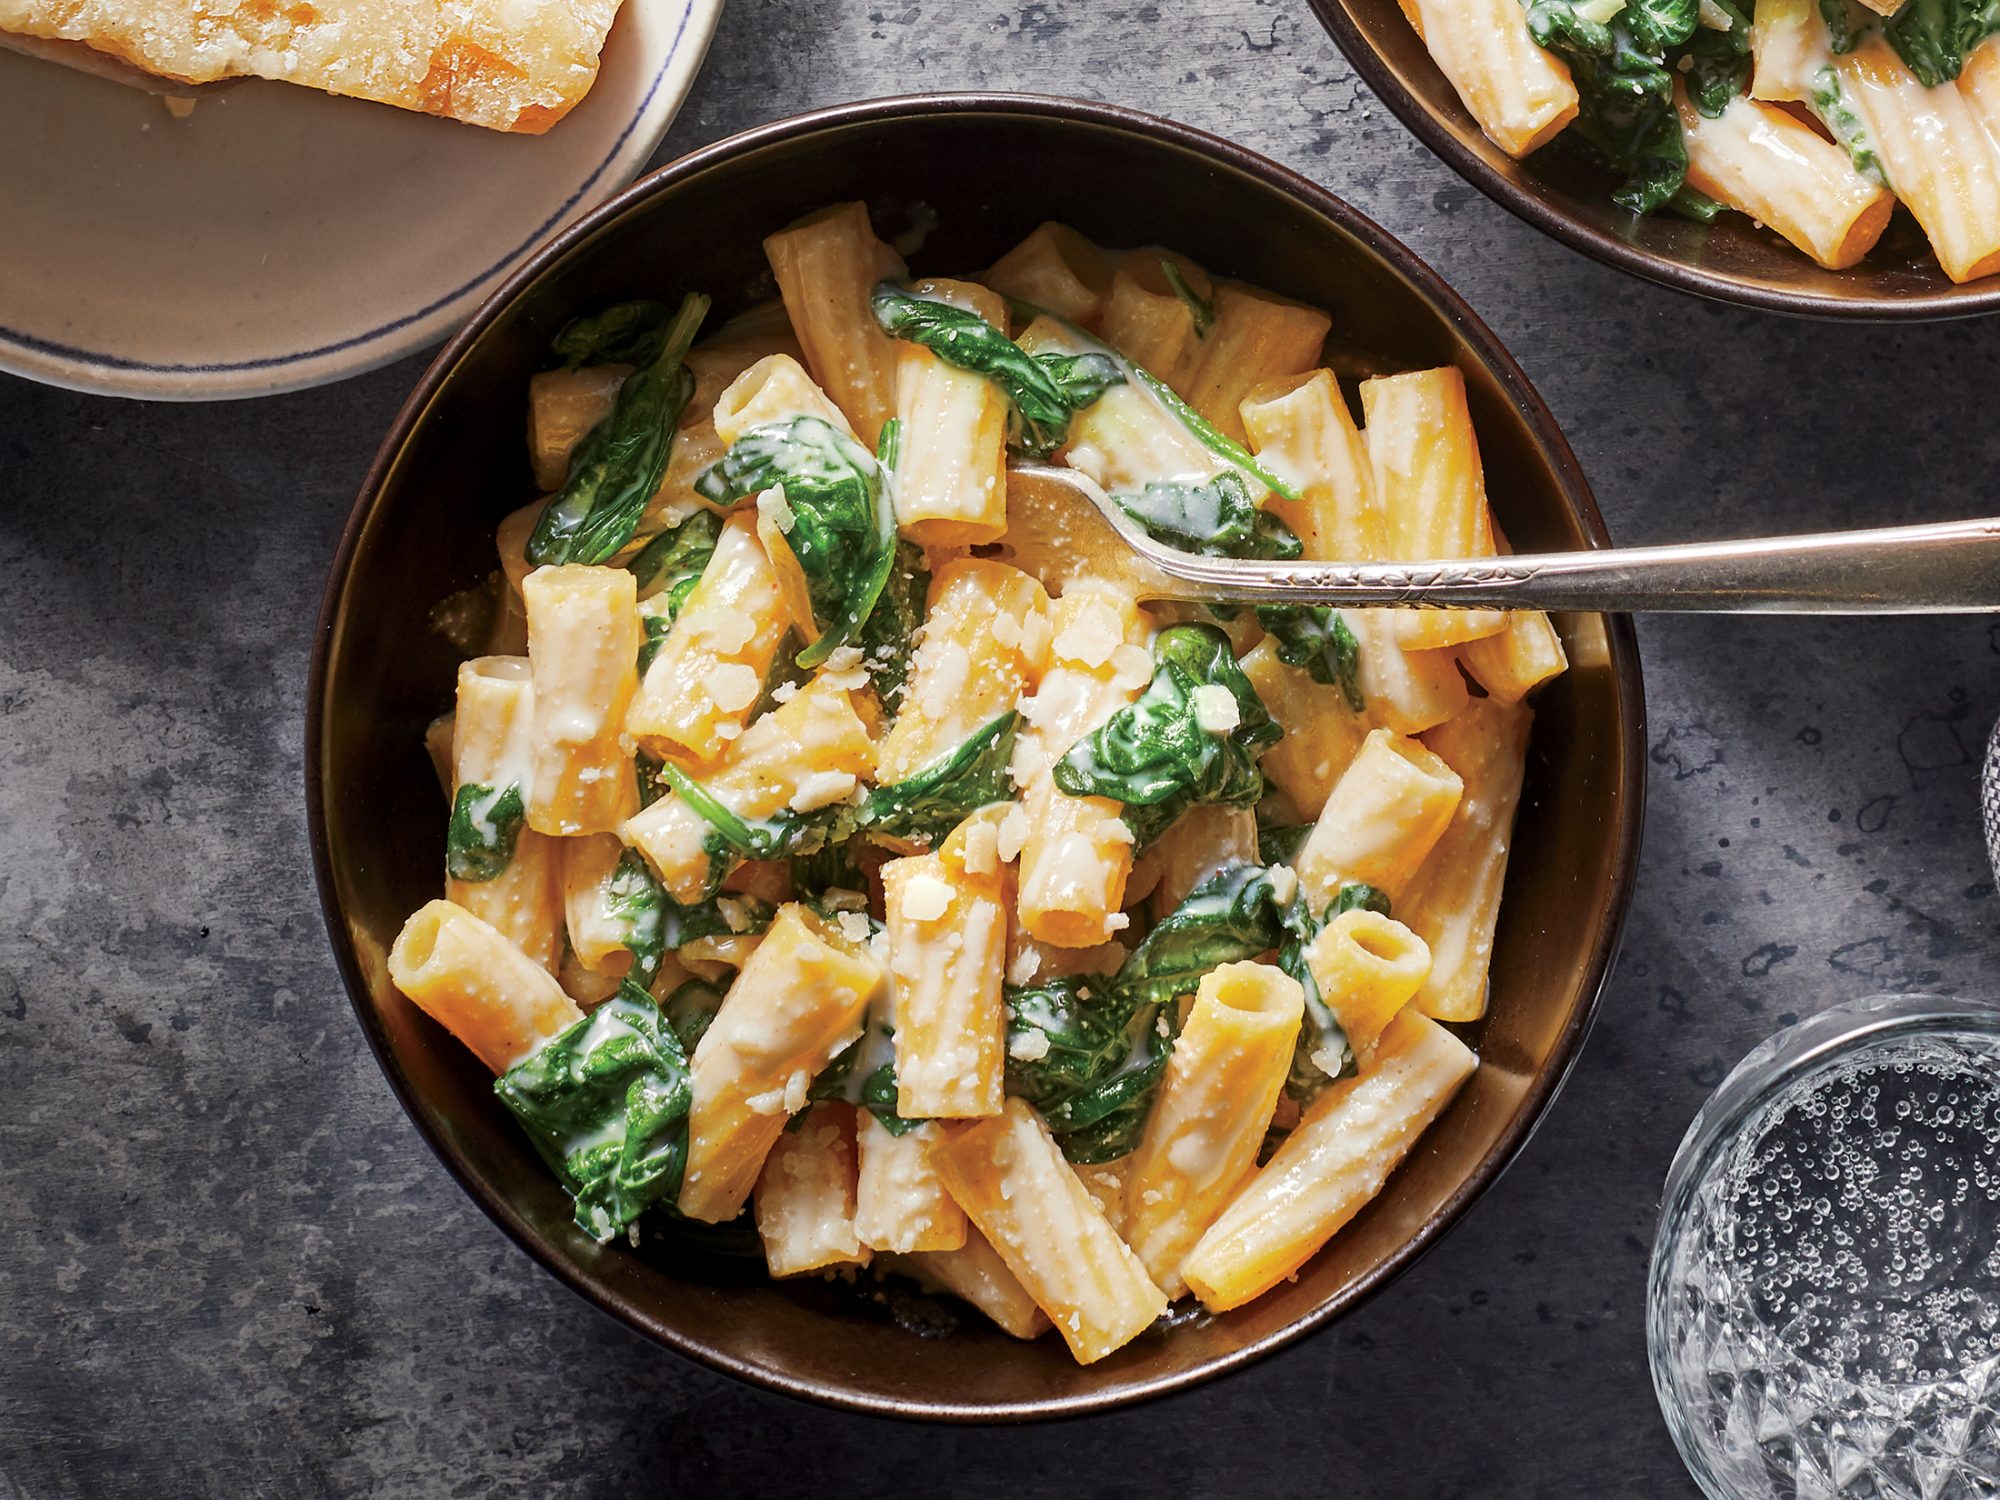 Creamy Four-Cheese Pasta with Spinach